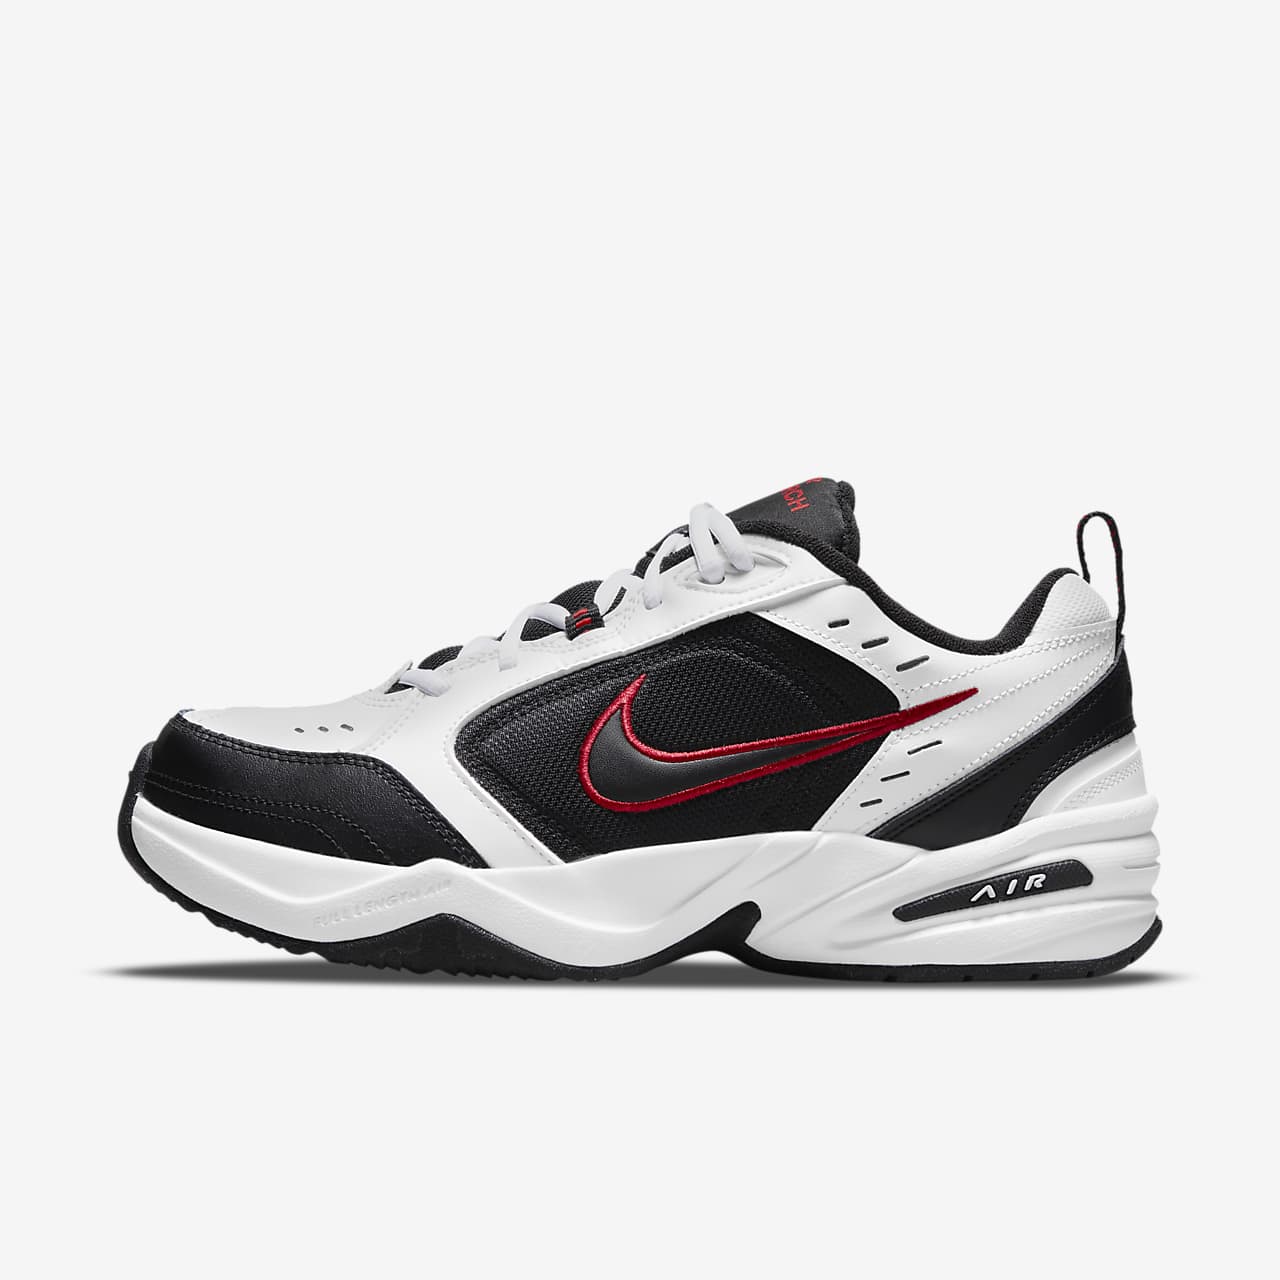 Ouille! 29+ VÃ©ritÃ©s sur Air Monarch Iv: These nike air monarch trainers are made with a leather 